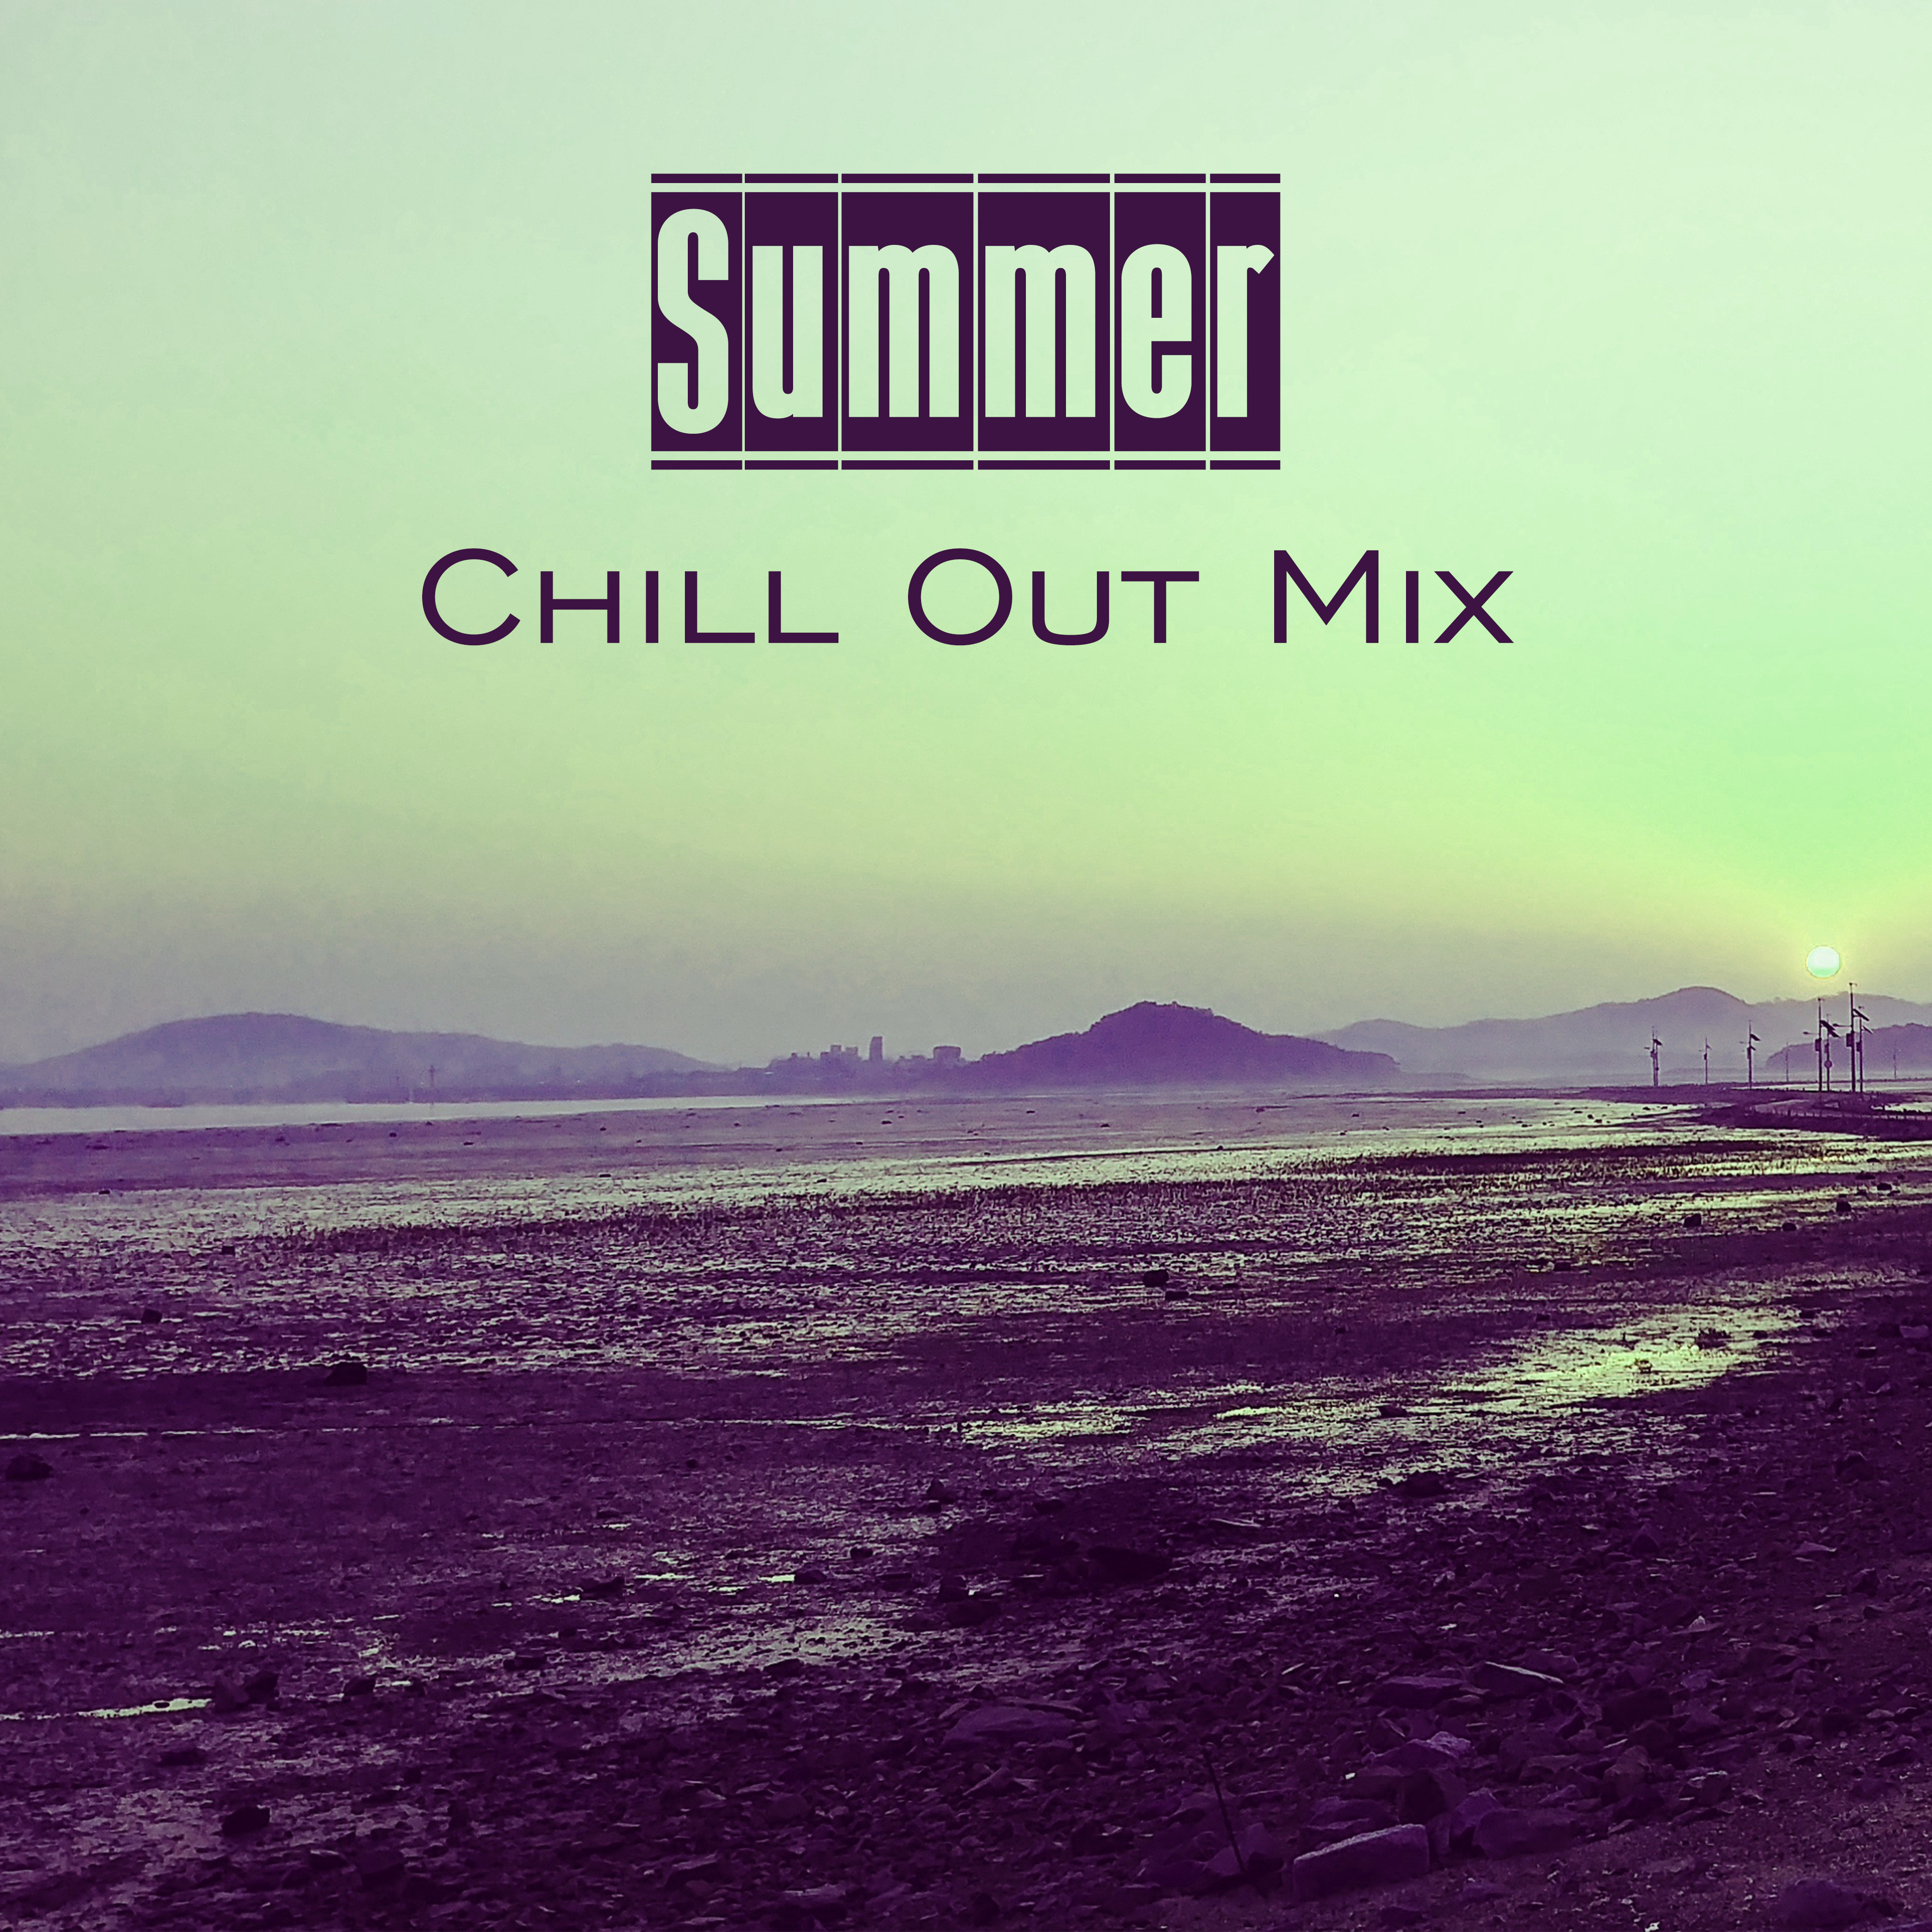 Summer Chill Out Mix  Relaxing Chill Out Songs, Sounds to Rest, Summer Vibes 2017, Beach Lounge